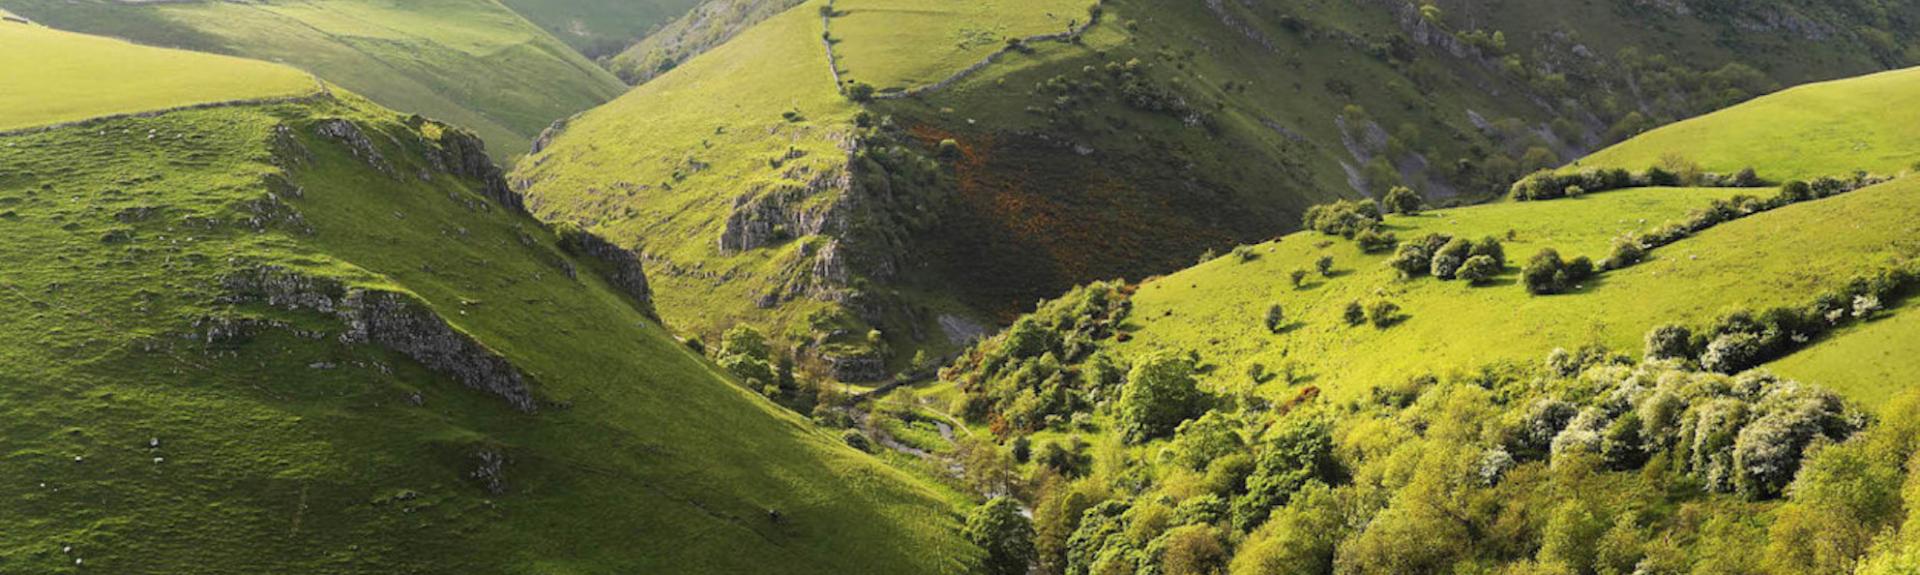 Thing to Do for Free in the Peak District